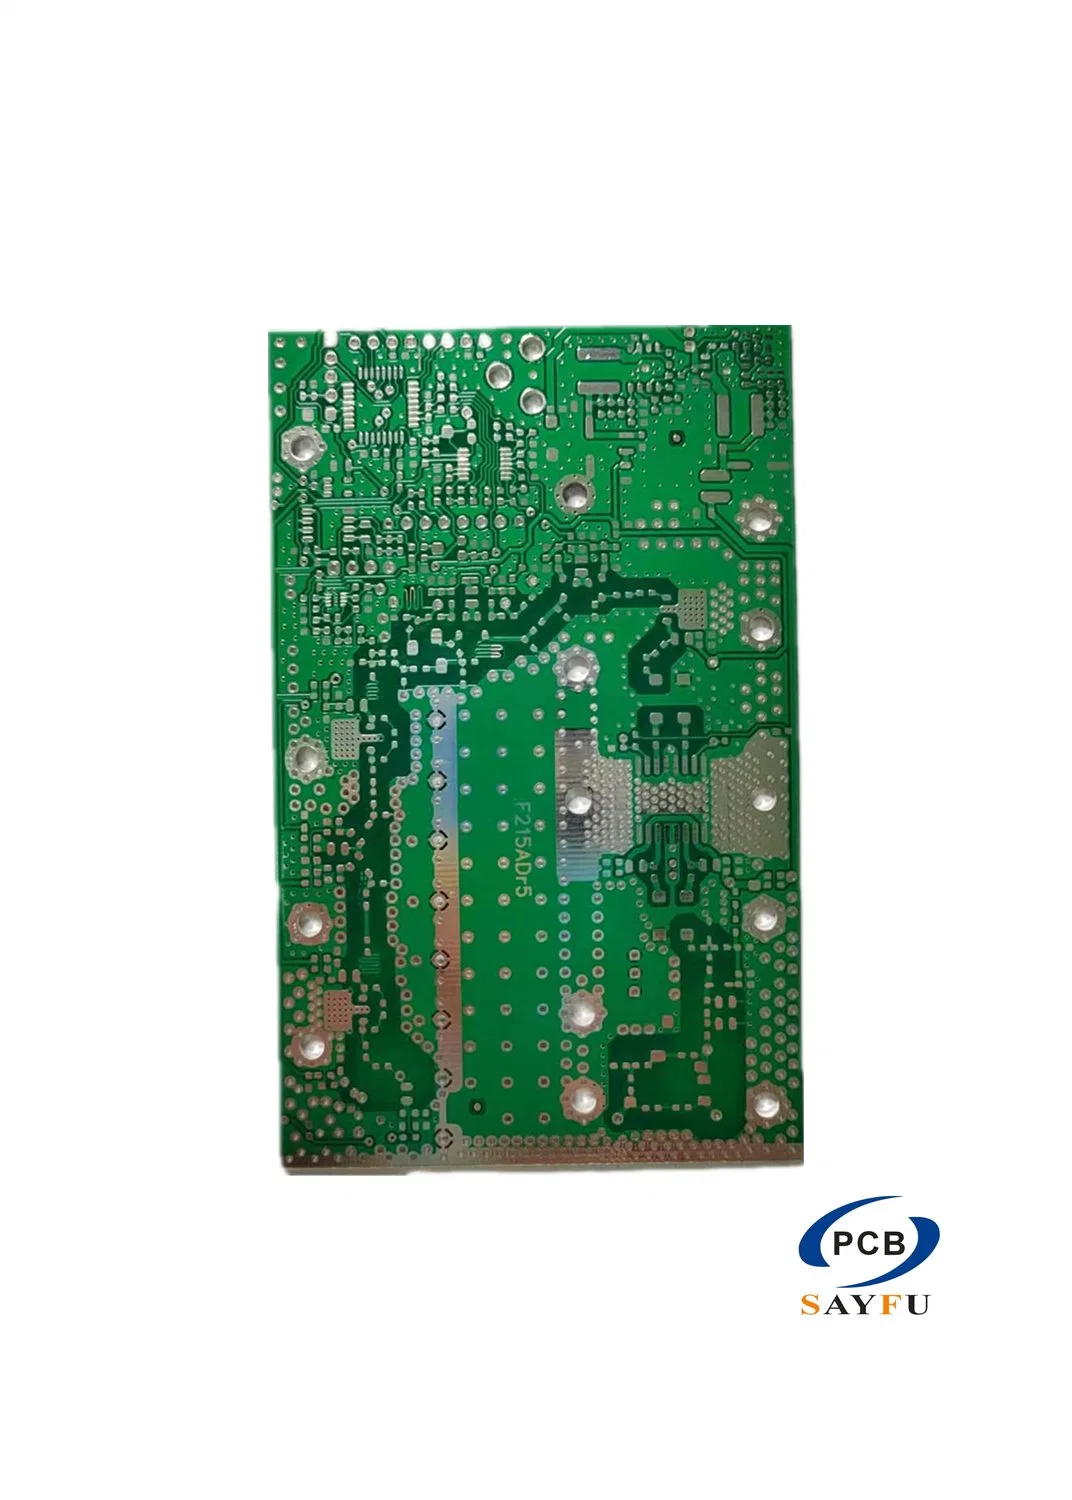 PCB Board Power Board Key Board Mother Board Manufacturer Printed Circuit Board for Medical Device